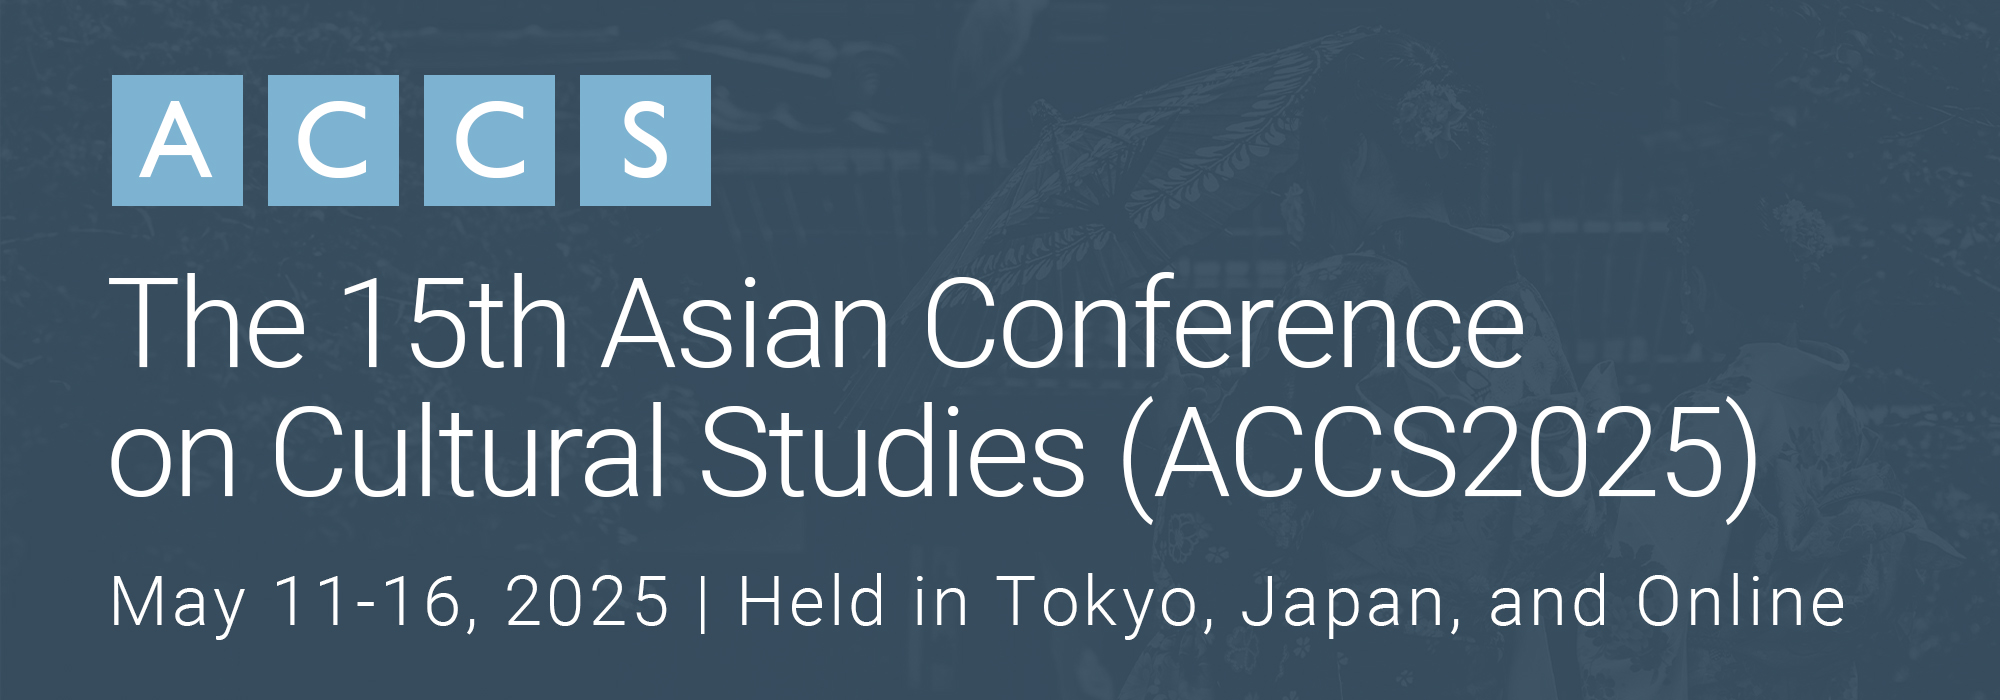 The Asian Conference on Cultural Studies (ACCS)